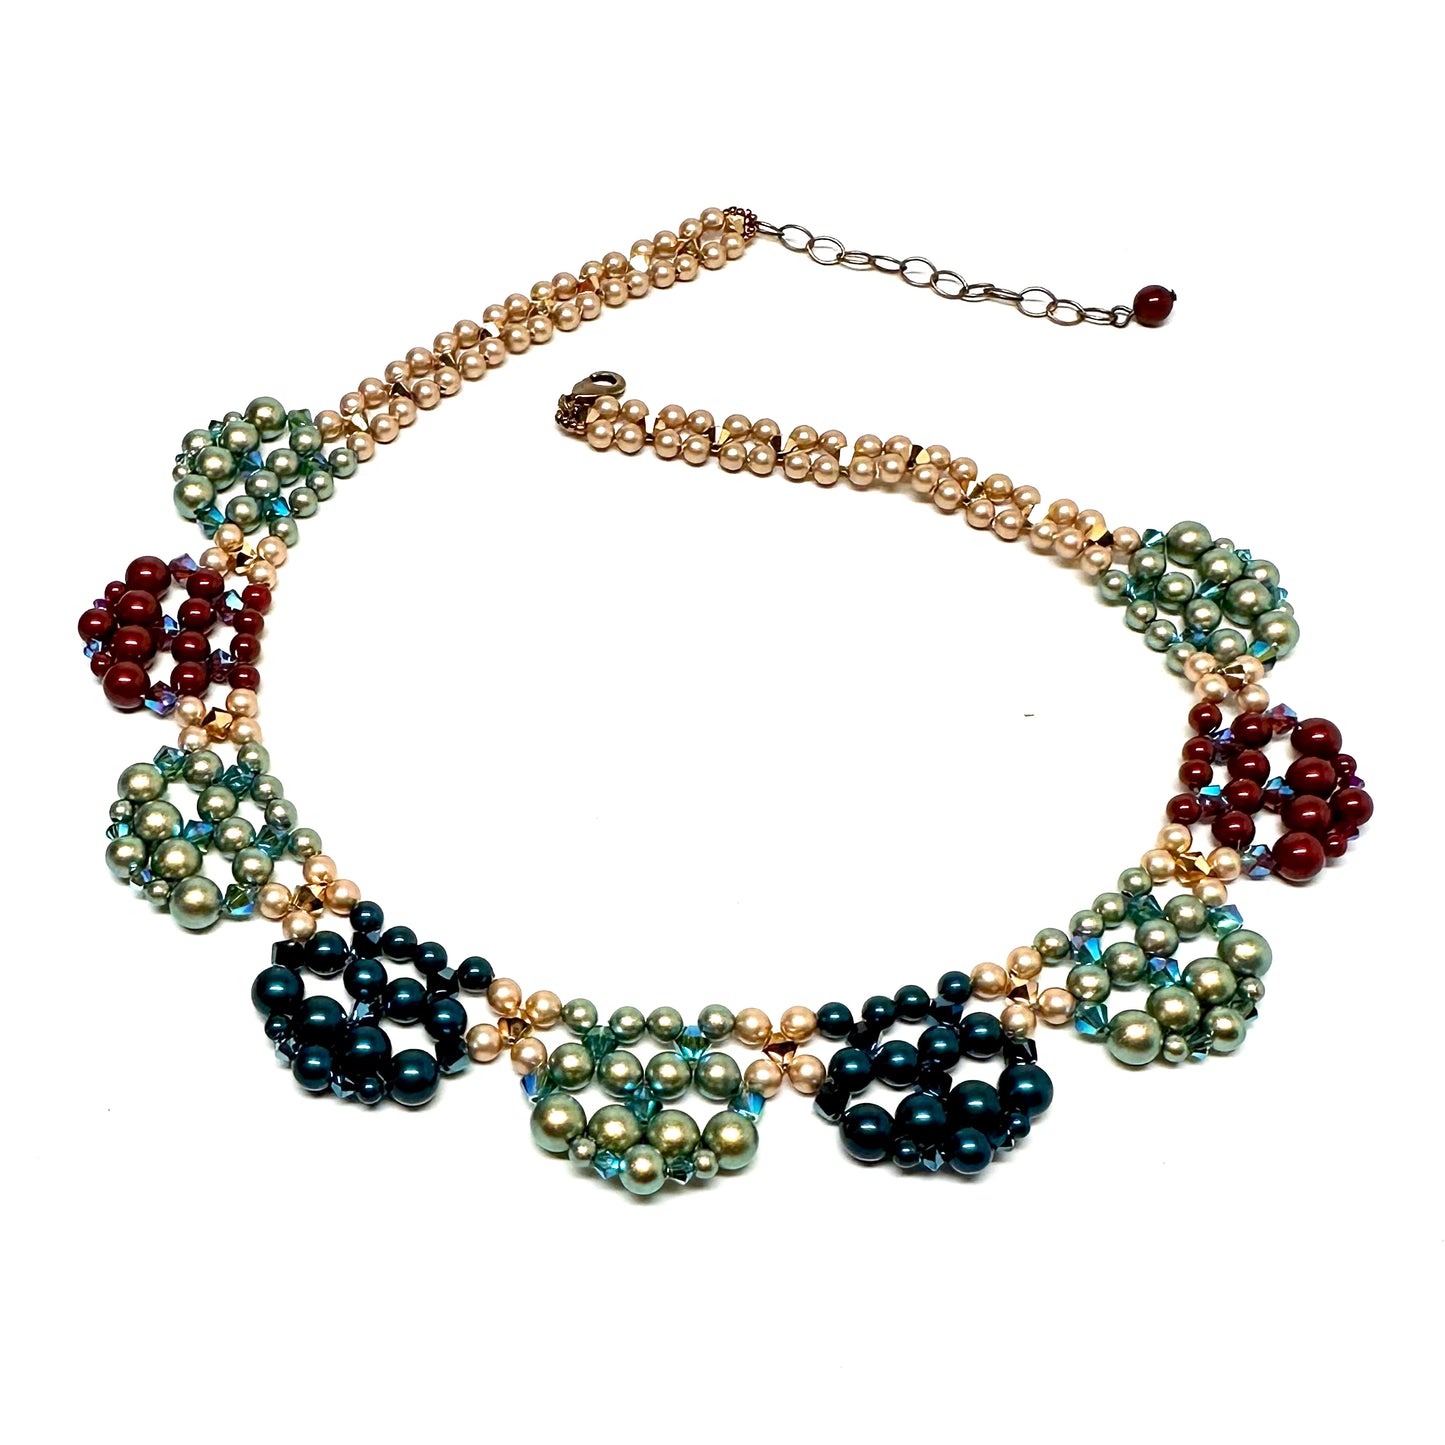 Art Deco Inspired Necklace | Statement in Jewel Colored Pearl & Crystal